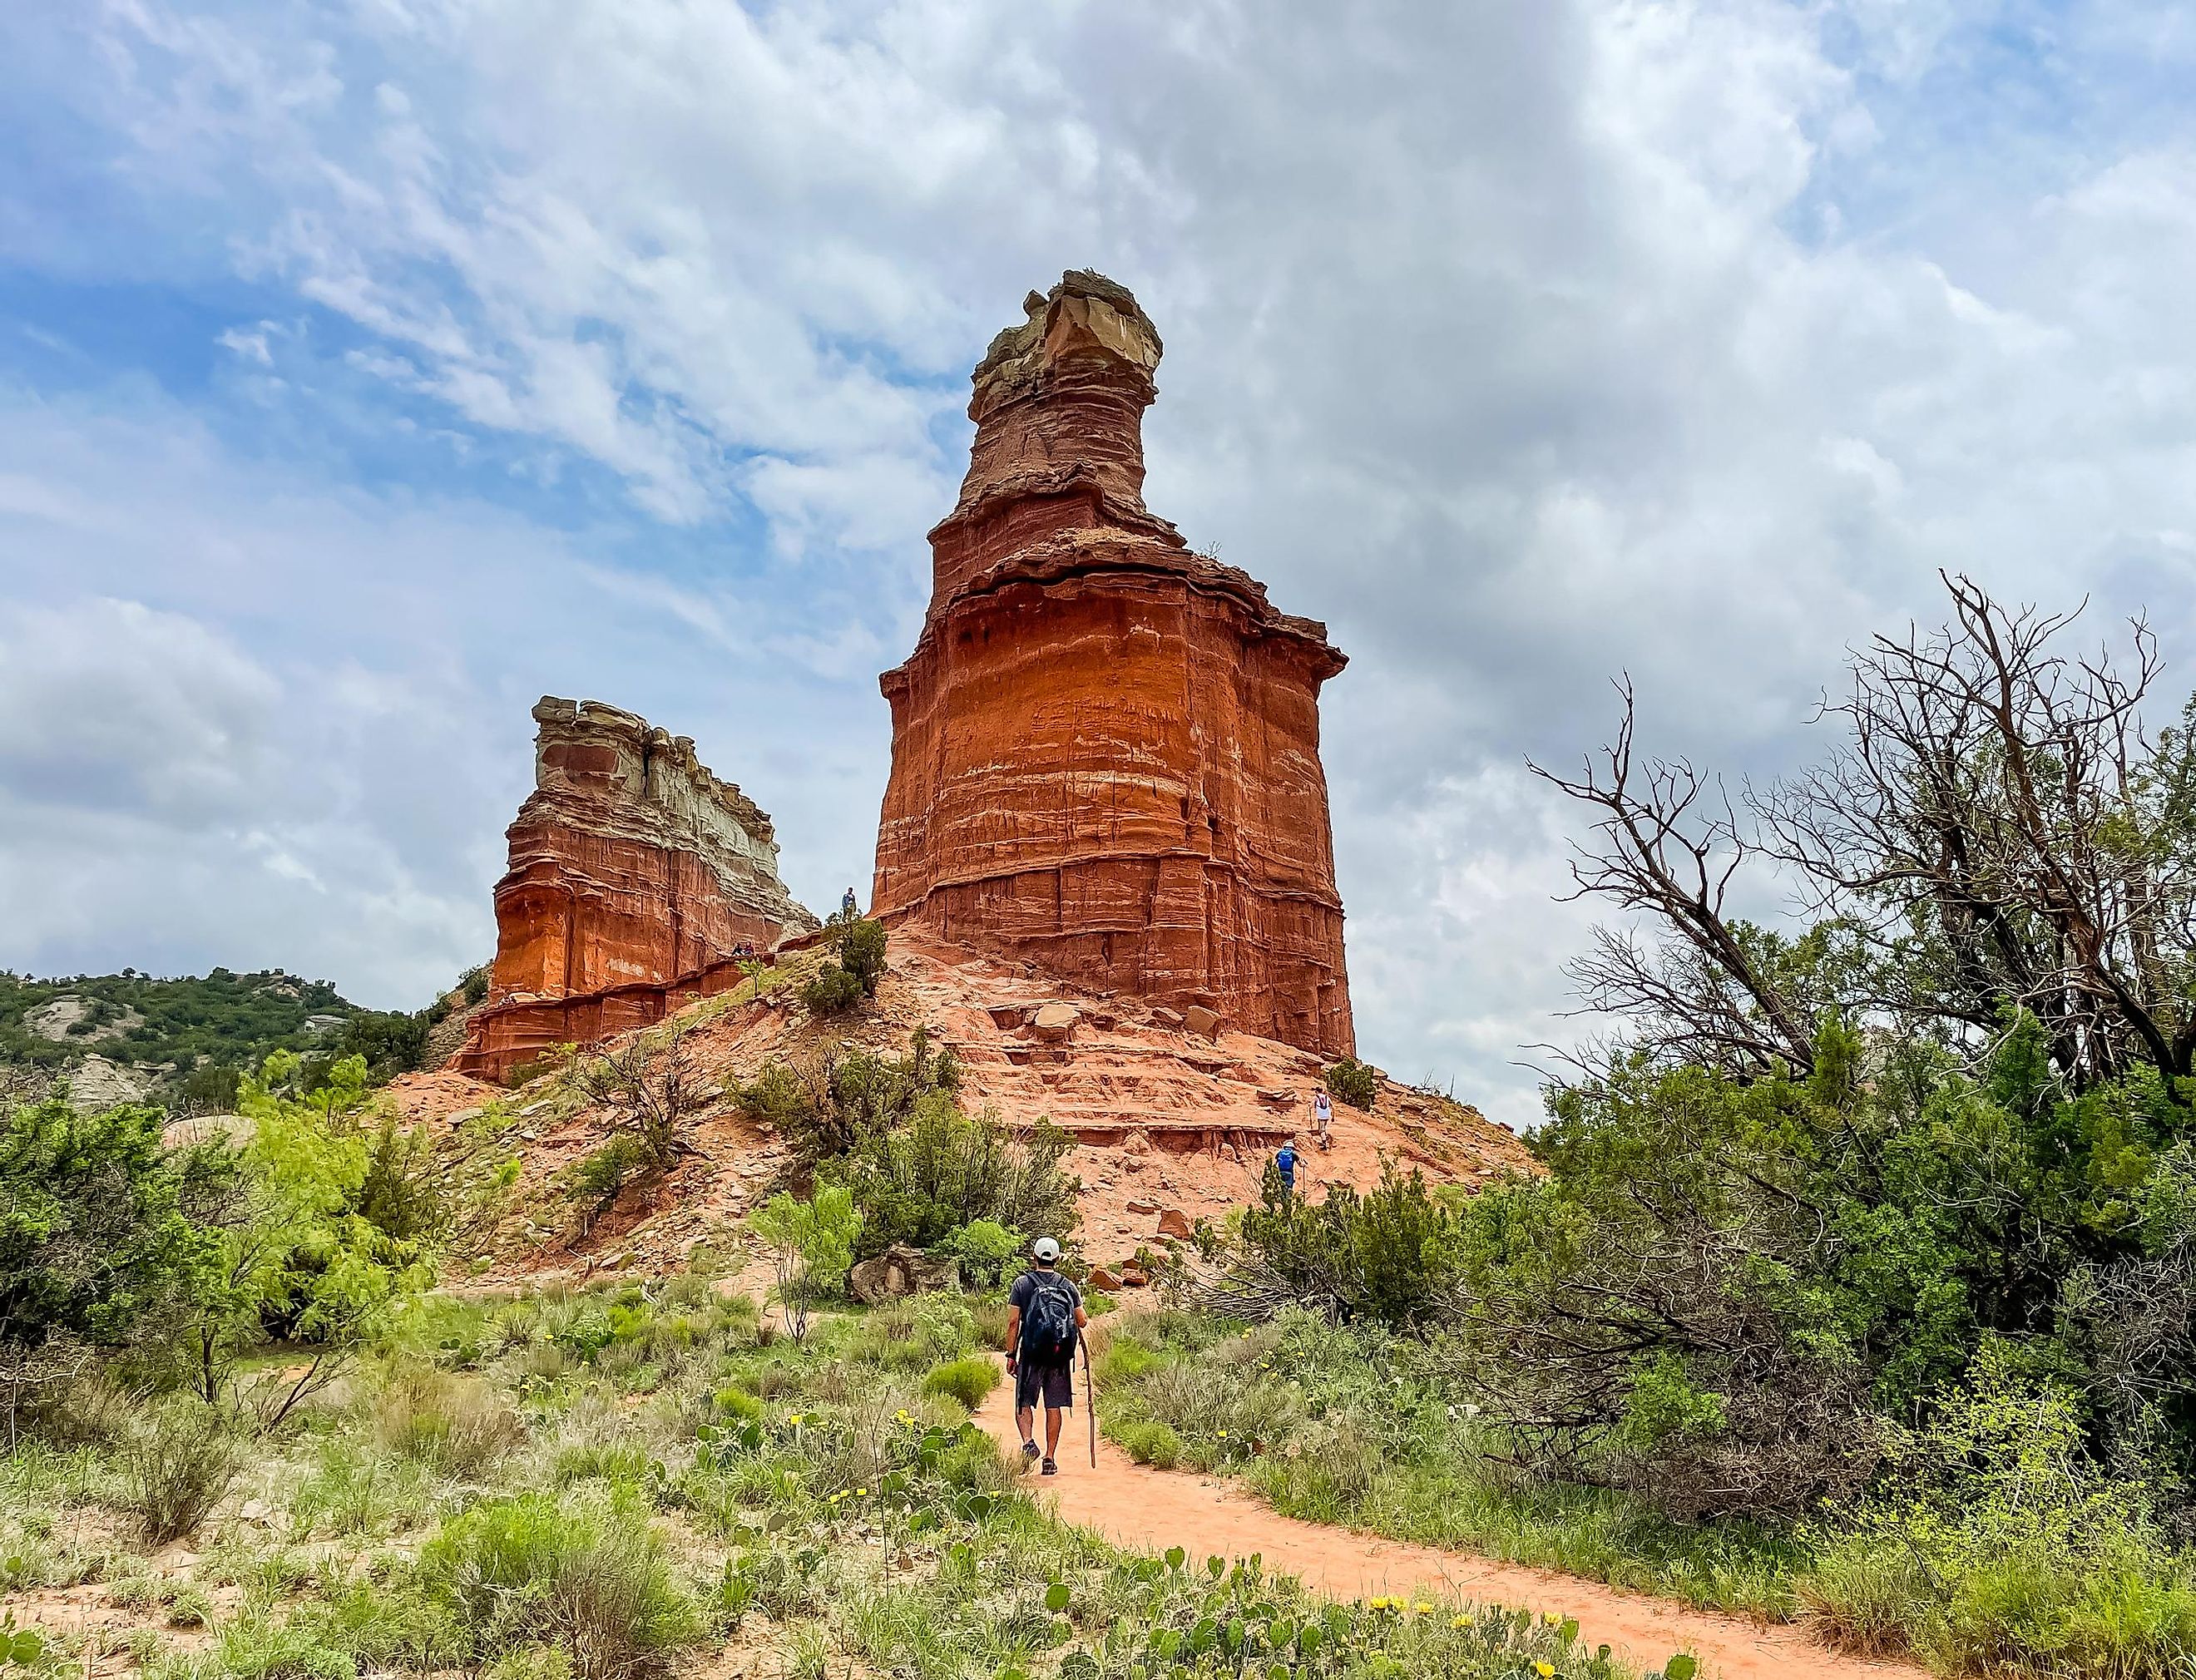 The Lighthouse, Palo Duro Canyon State Park.